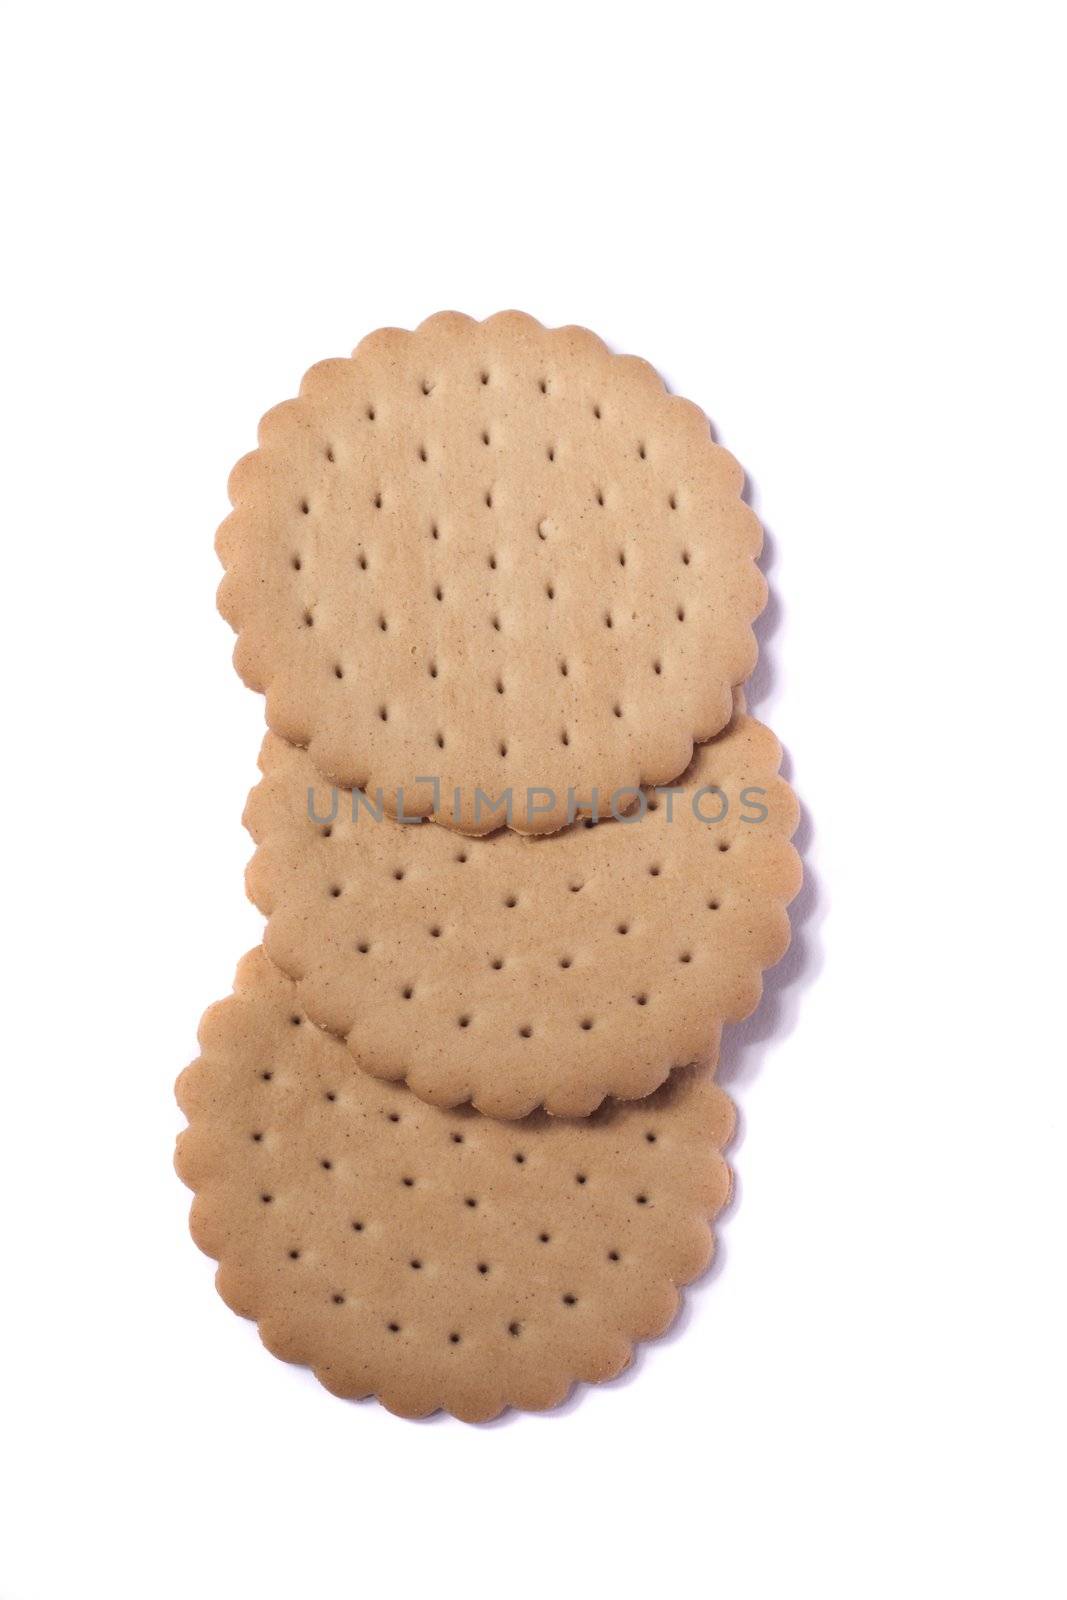 View of three round biscuits isolated on a white background.